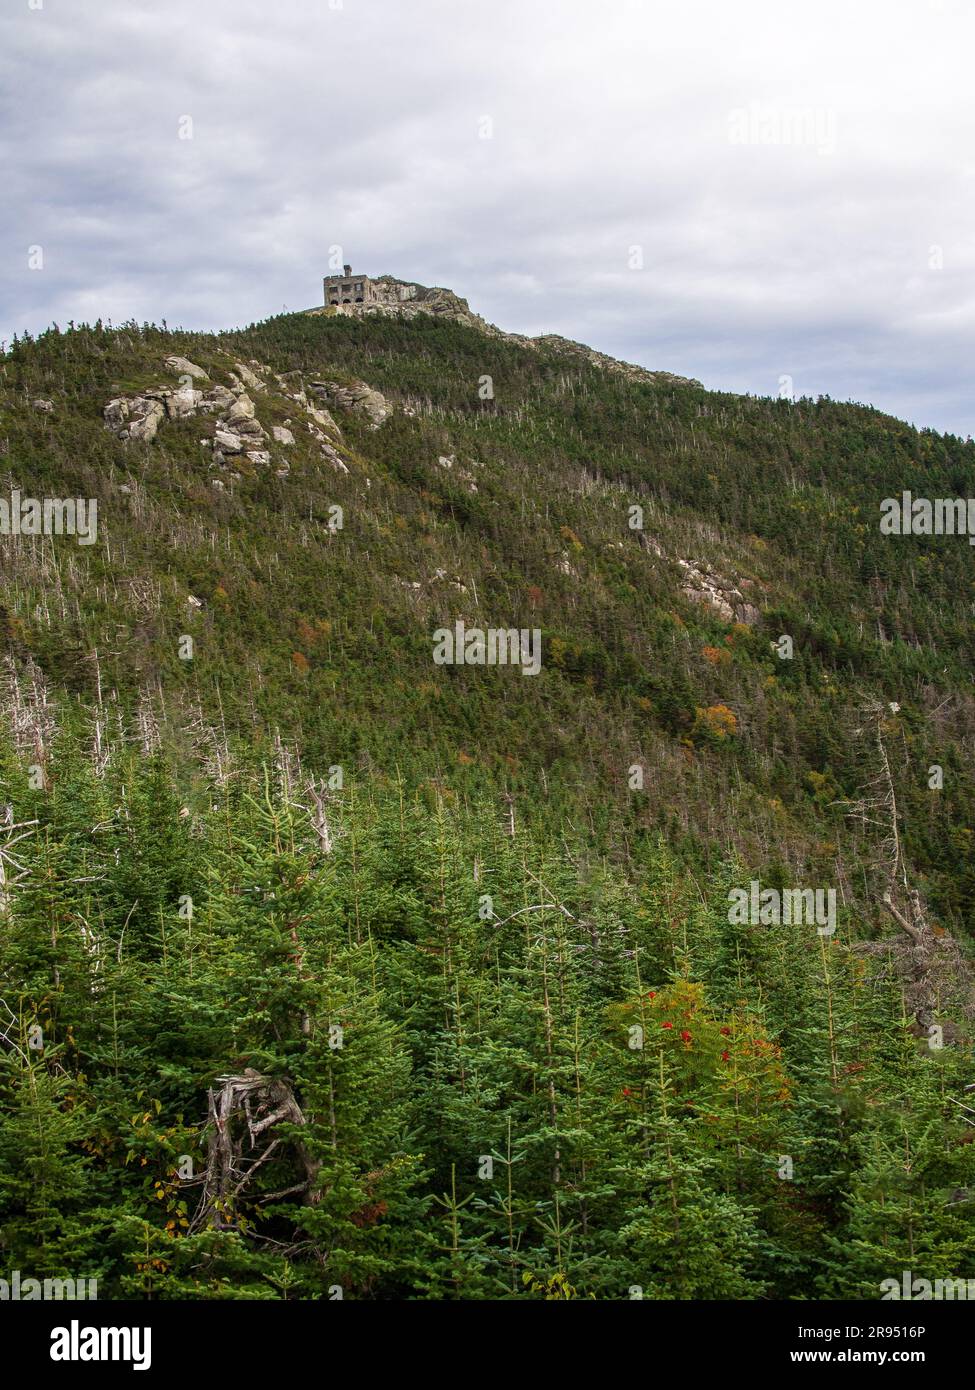 From the pine-covered base, the top station of Whiteface Mountain is seen in the distance. Stock Photo